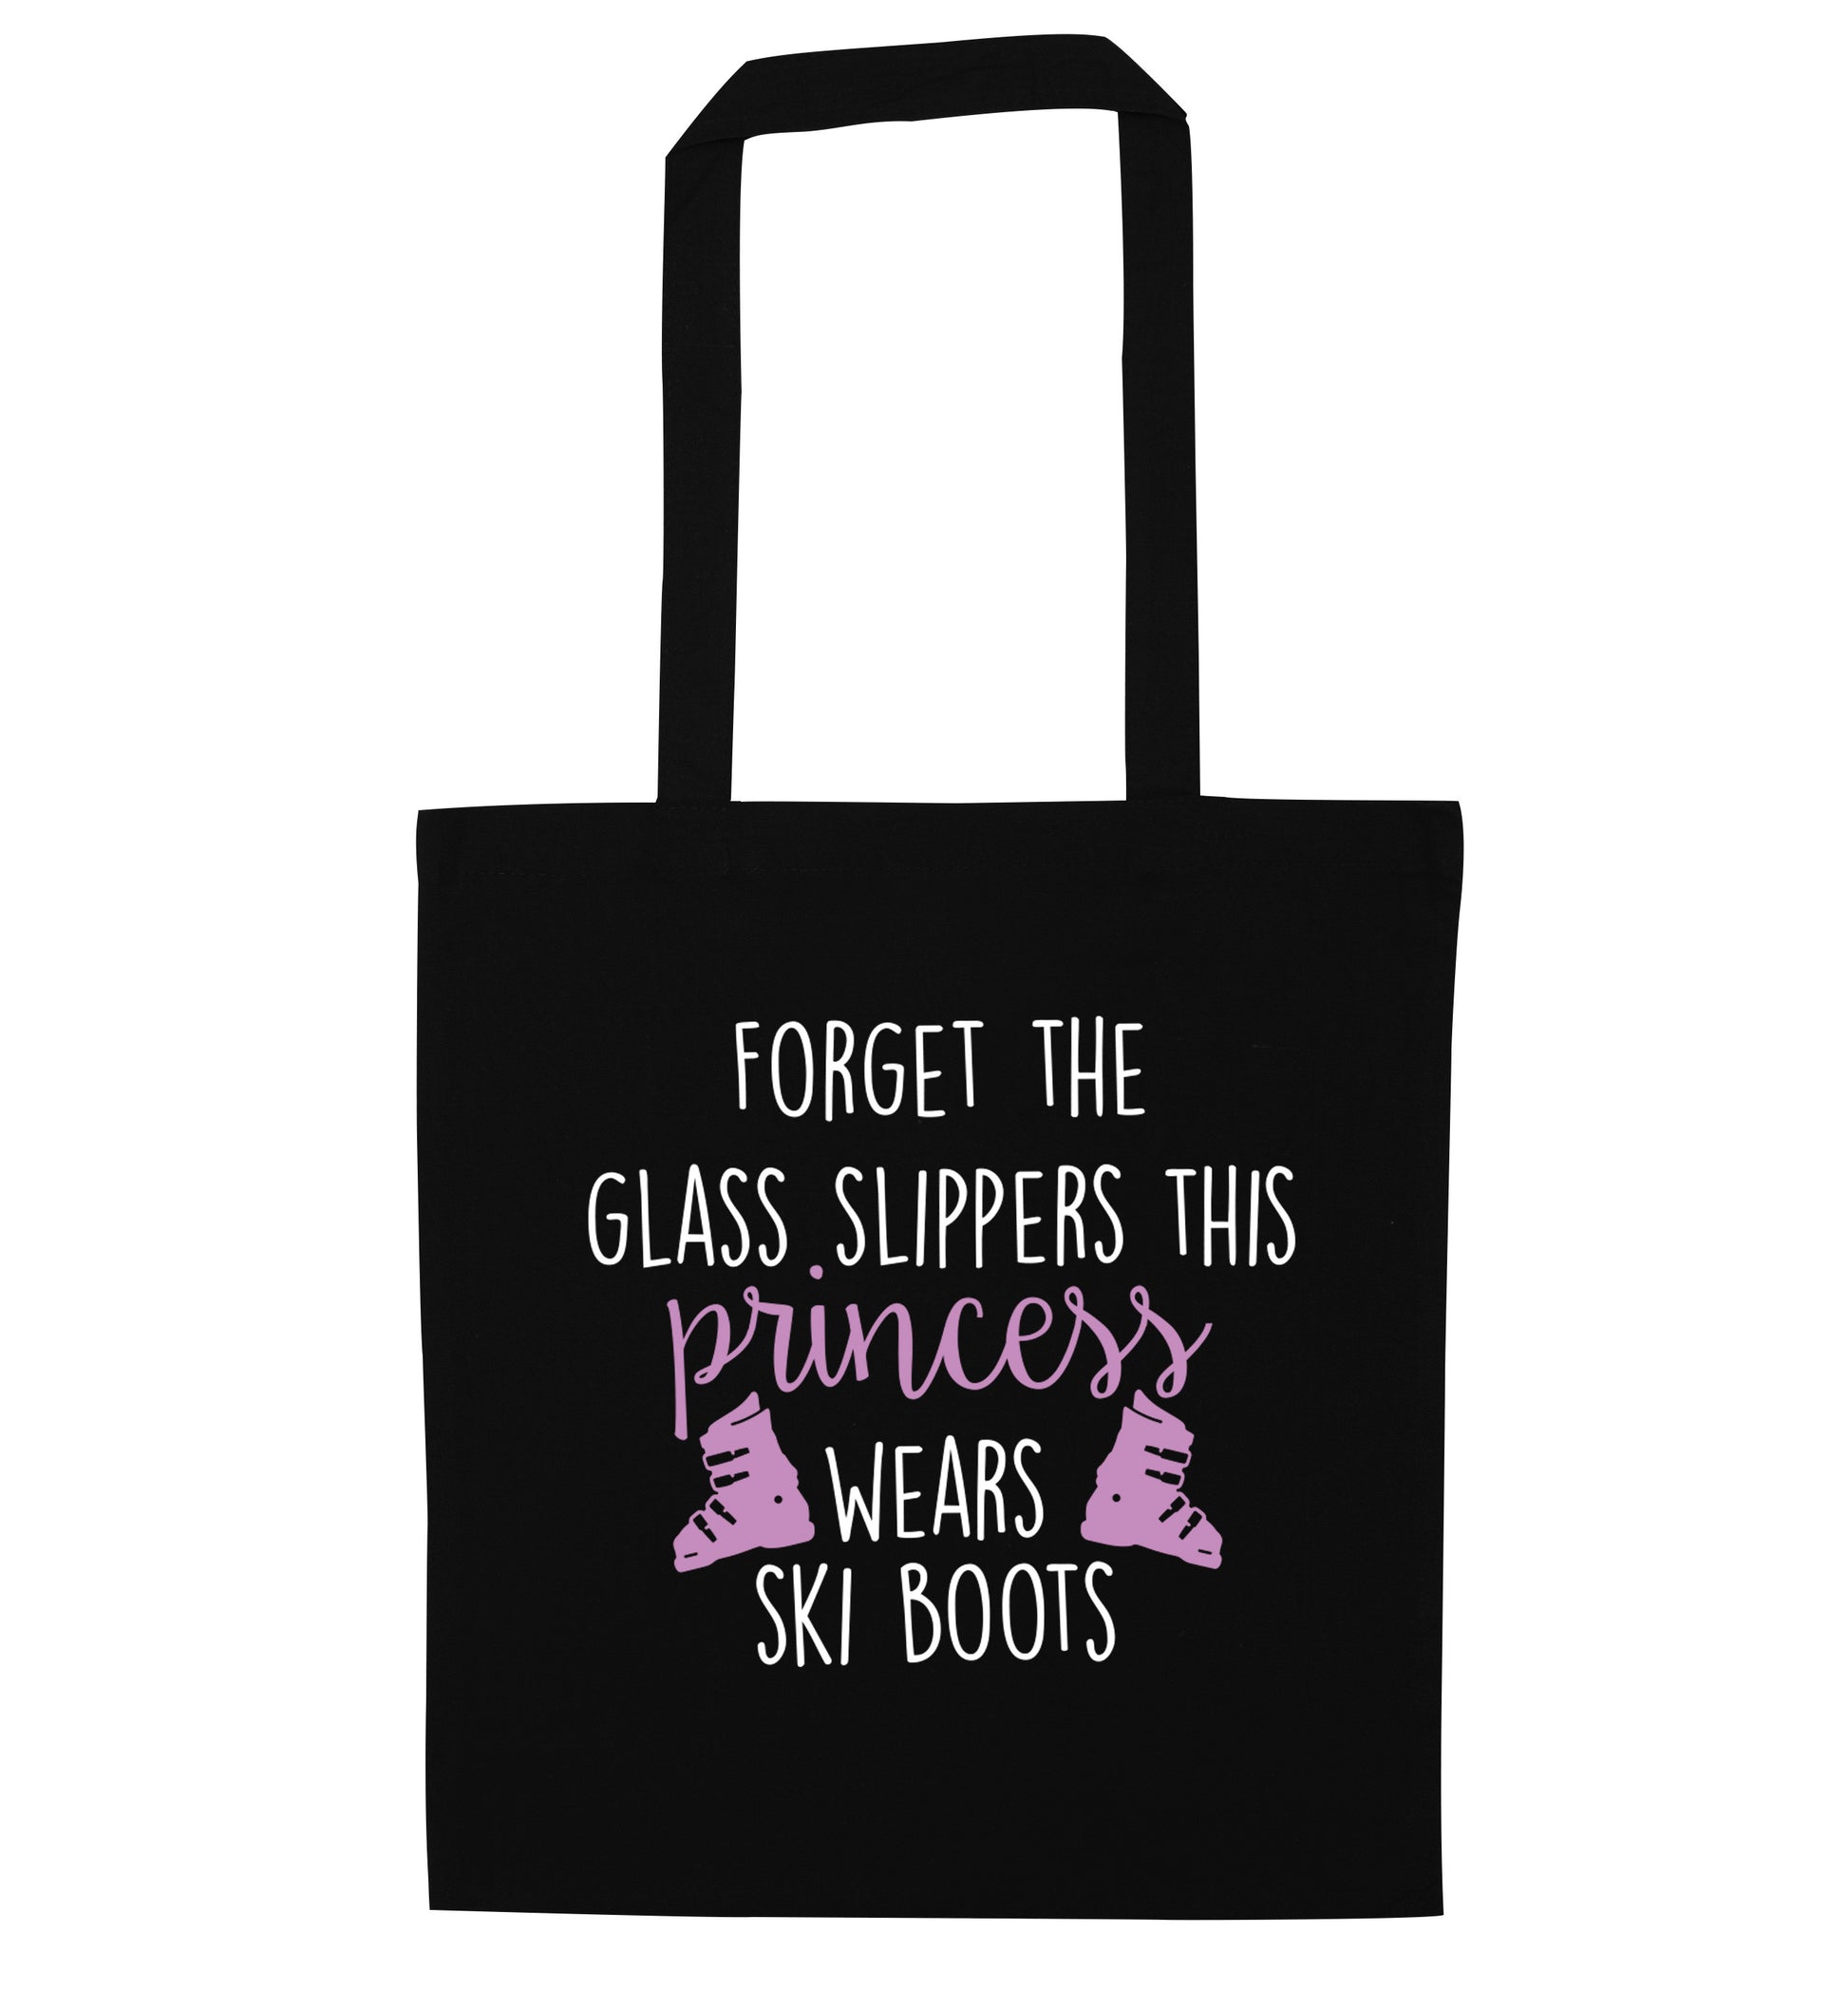 Forget the glass slippers this princess wears ski boots black tote bag